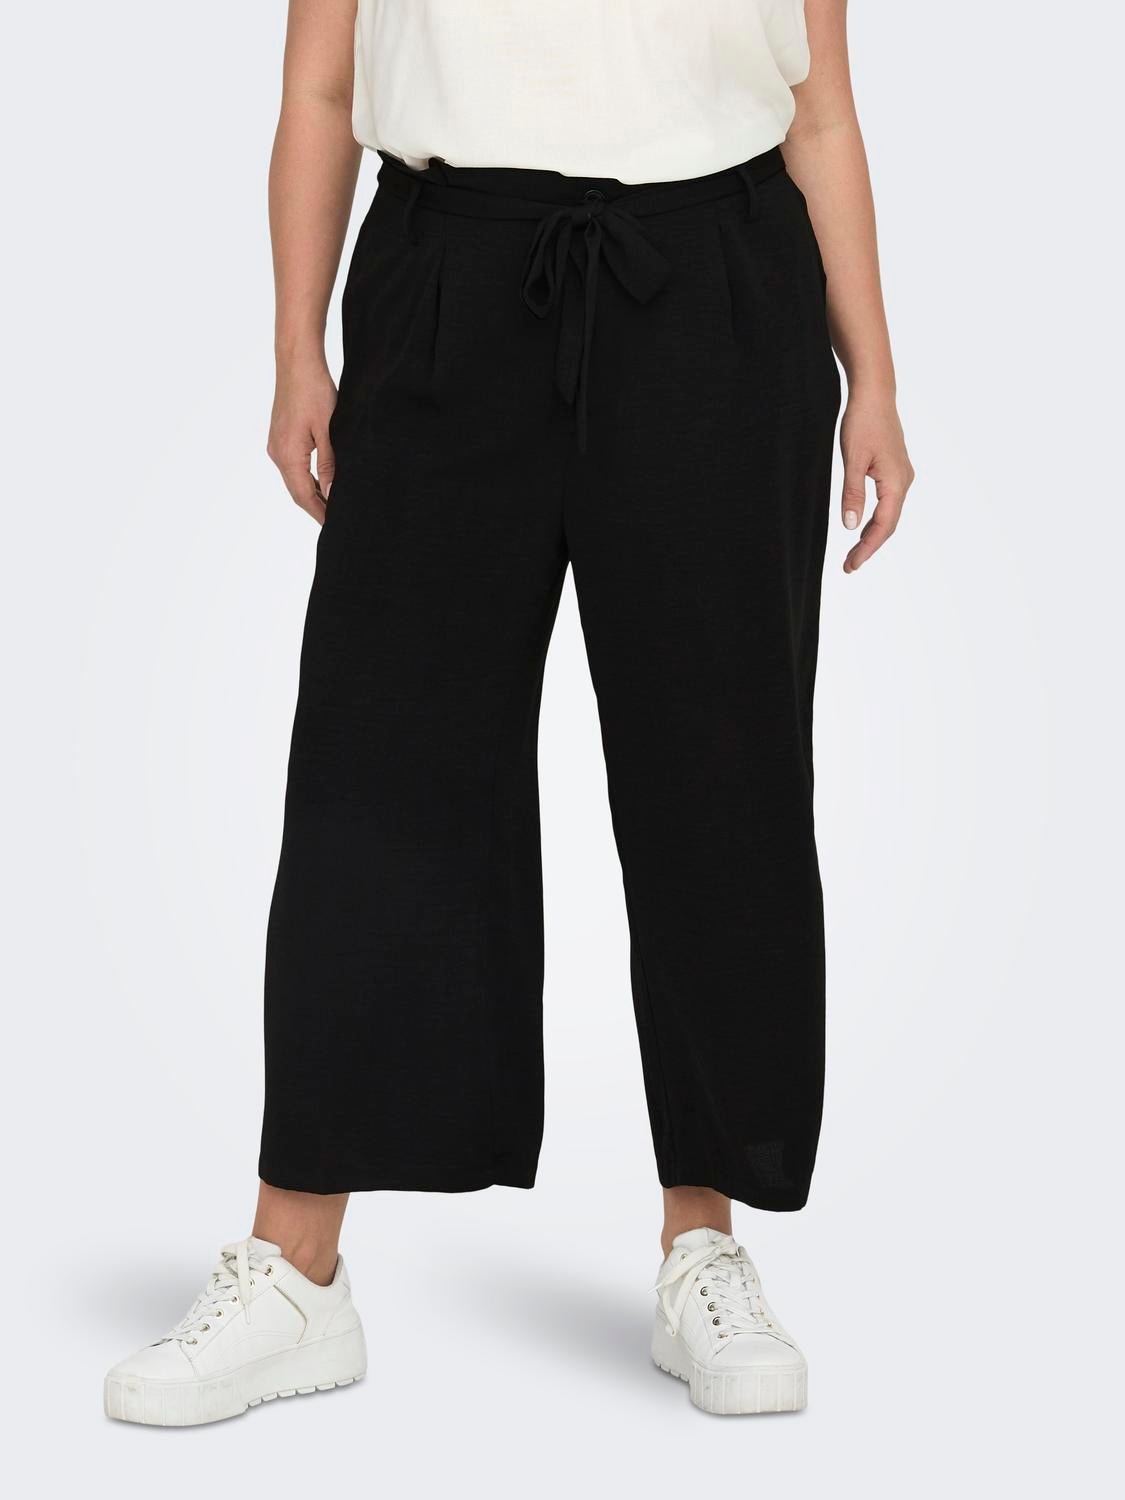 ONLY Curvy wide Leg Pants With Belt -Black - 15290293